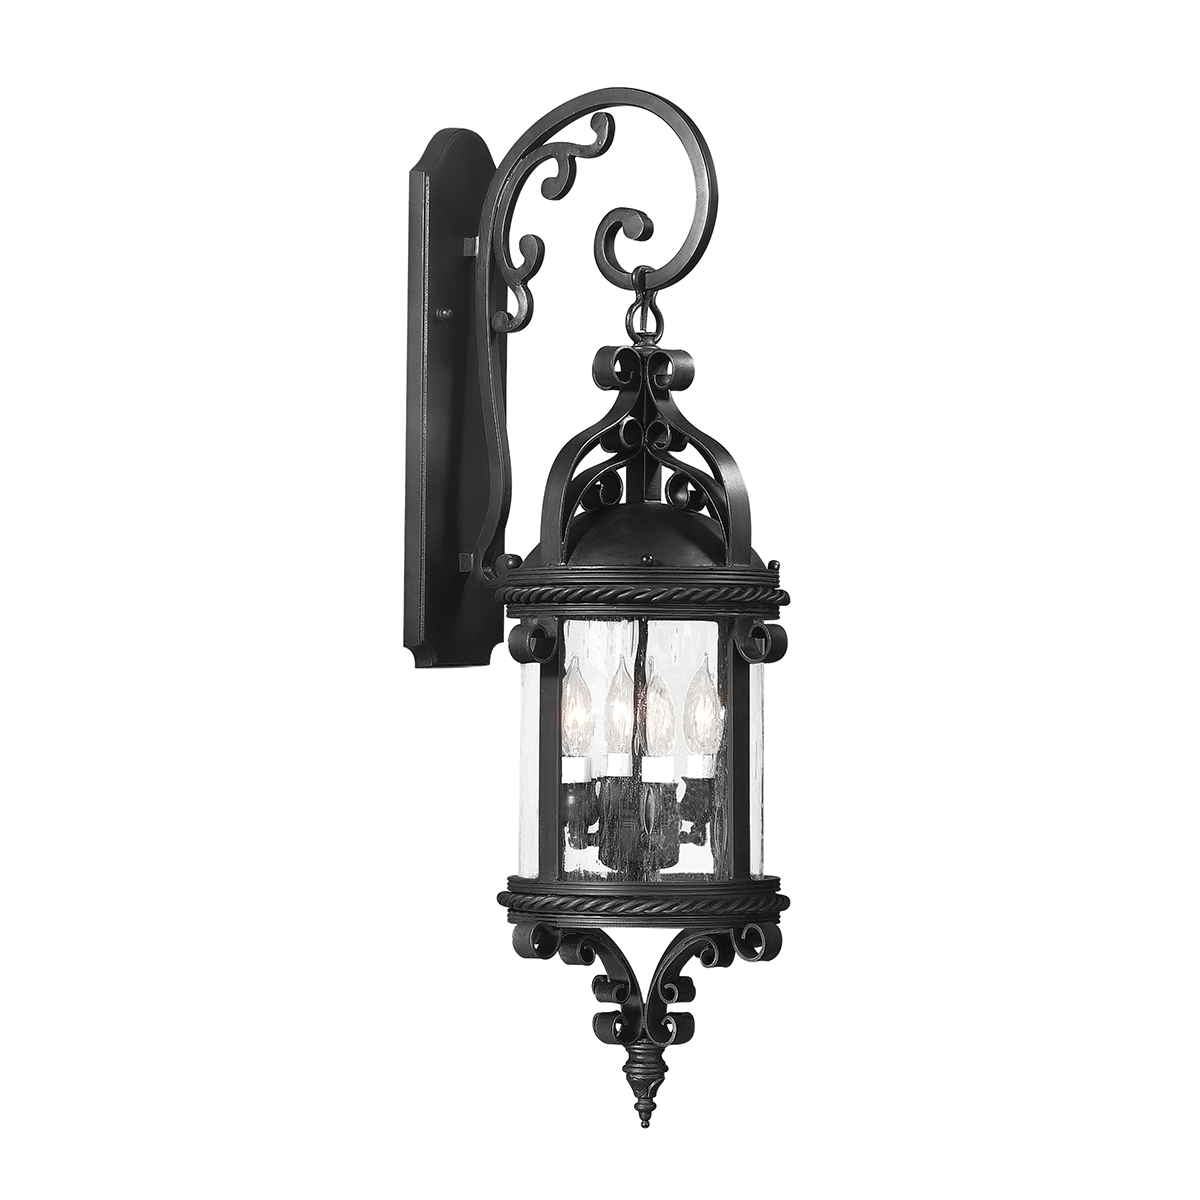 Troy Lighting PAMPLONA 4LT WALL LANTERN LARGE BCD9122 Outdoor l Wall Troy Lighting OLD BRONZE  